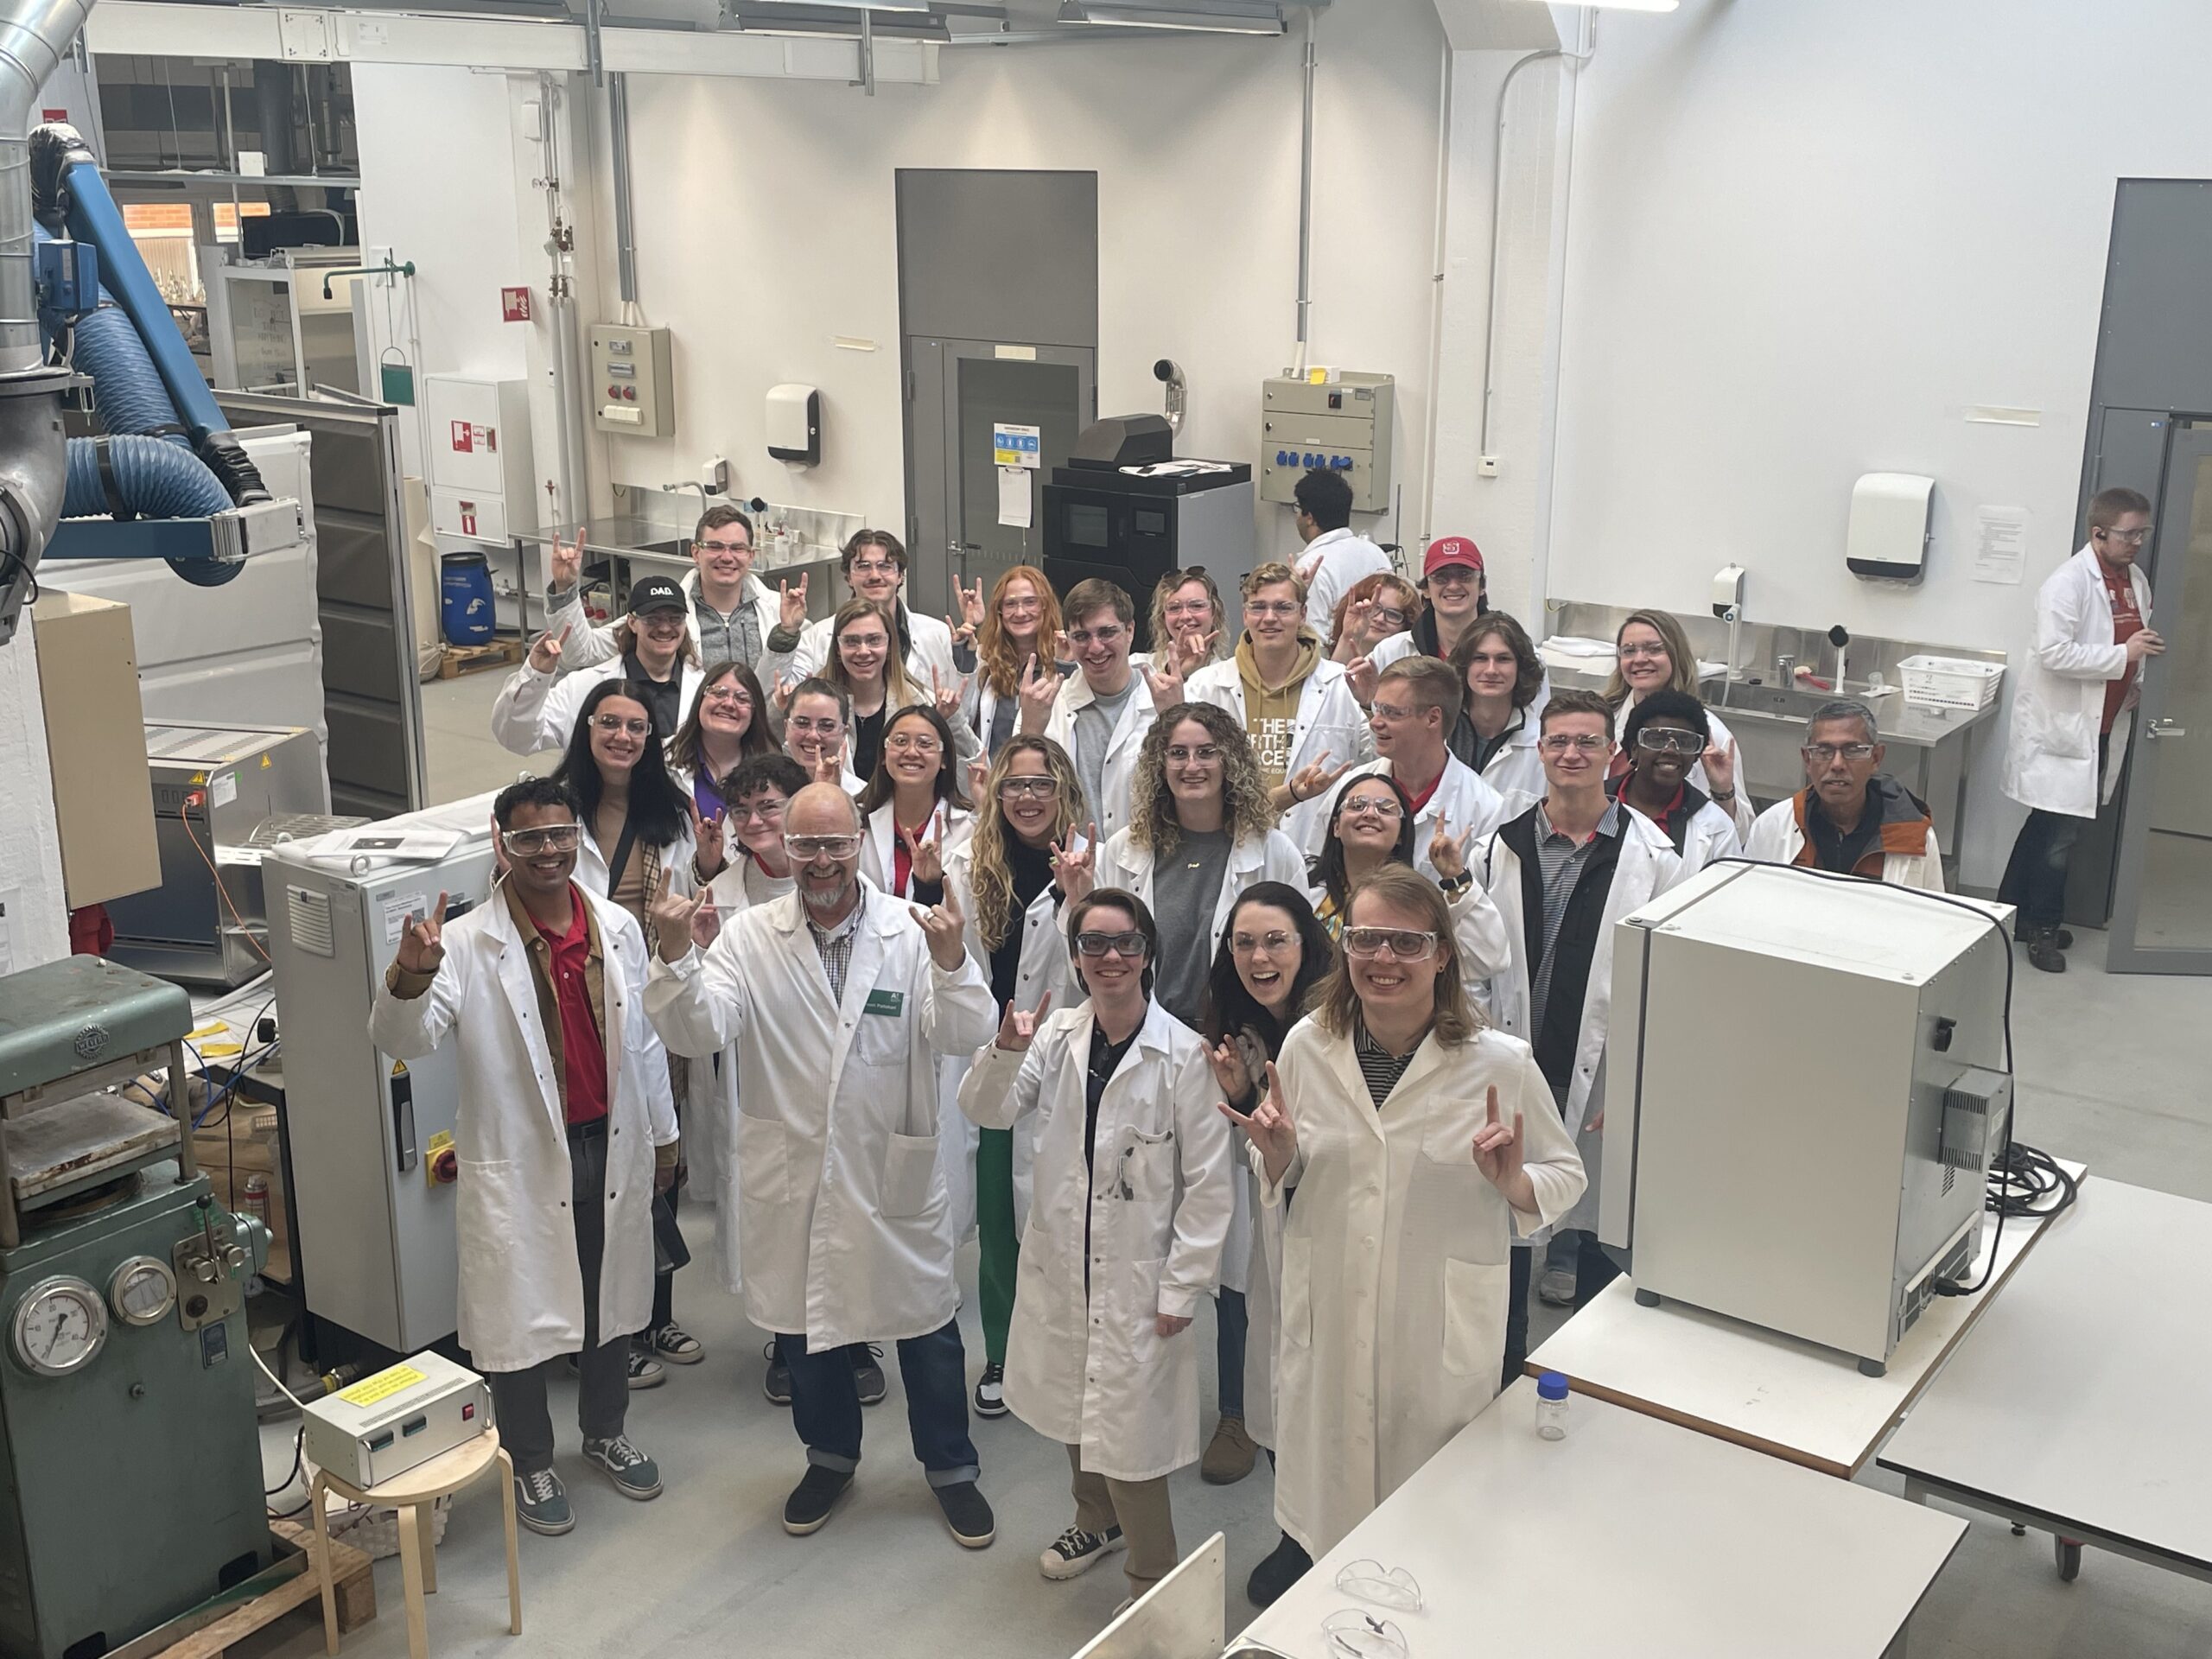 Students put up the wolfy sign in the lab - Day 2 - Aalto University and Valmet Jarvenpaa Pilot Plant - Paper Science and Engineering Study Abroad